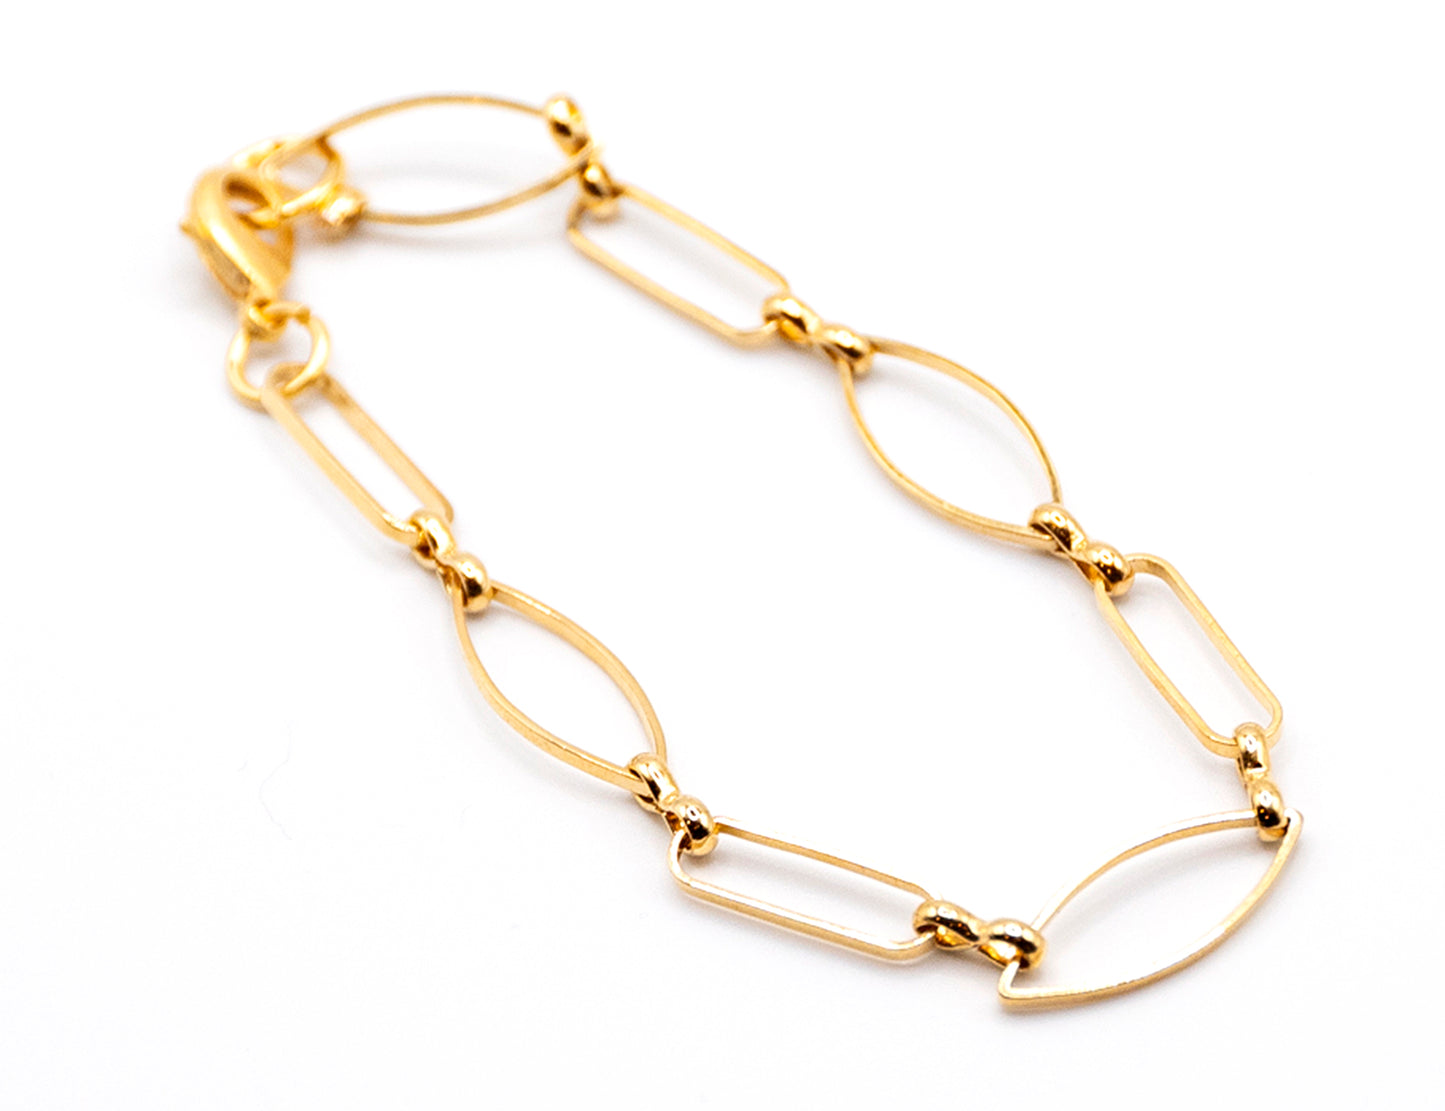 Oval and Rectangle Chain Bracelet, Anklet or Necklace